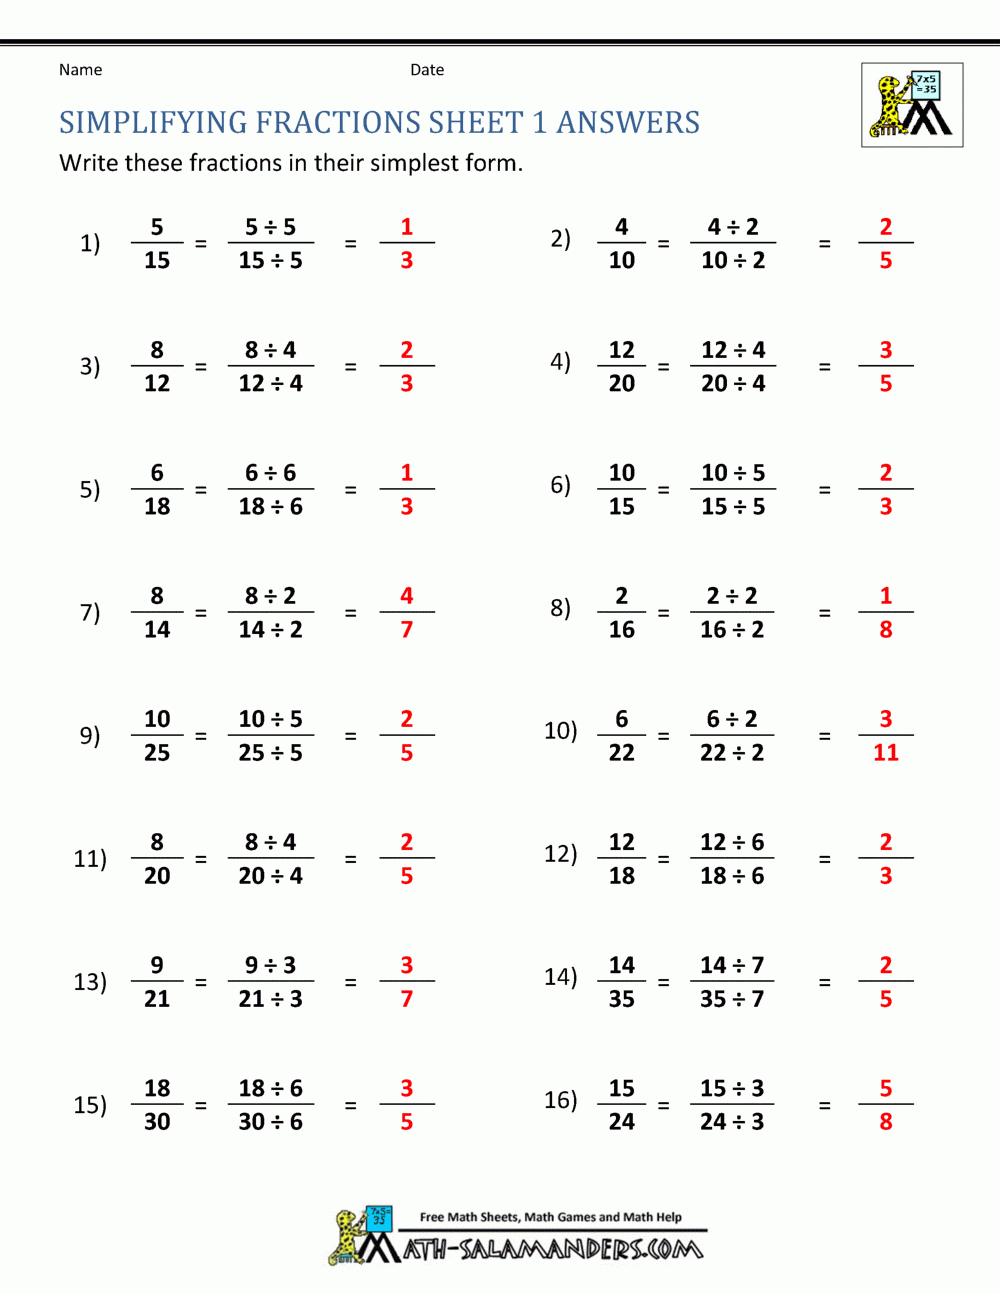 Simplifying Fractions Worksheet With Answers | db-excel.com